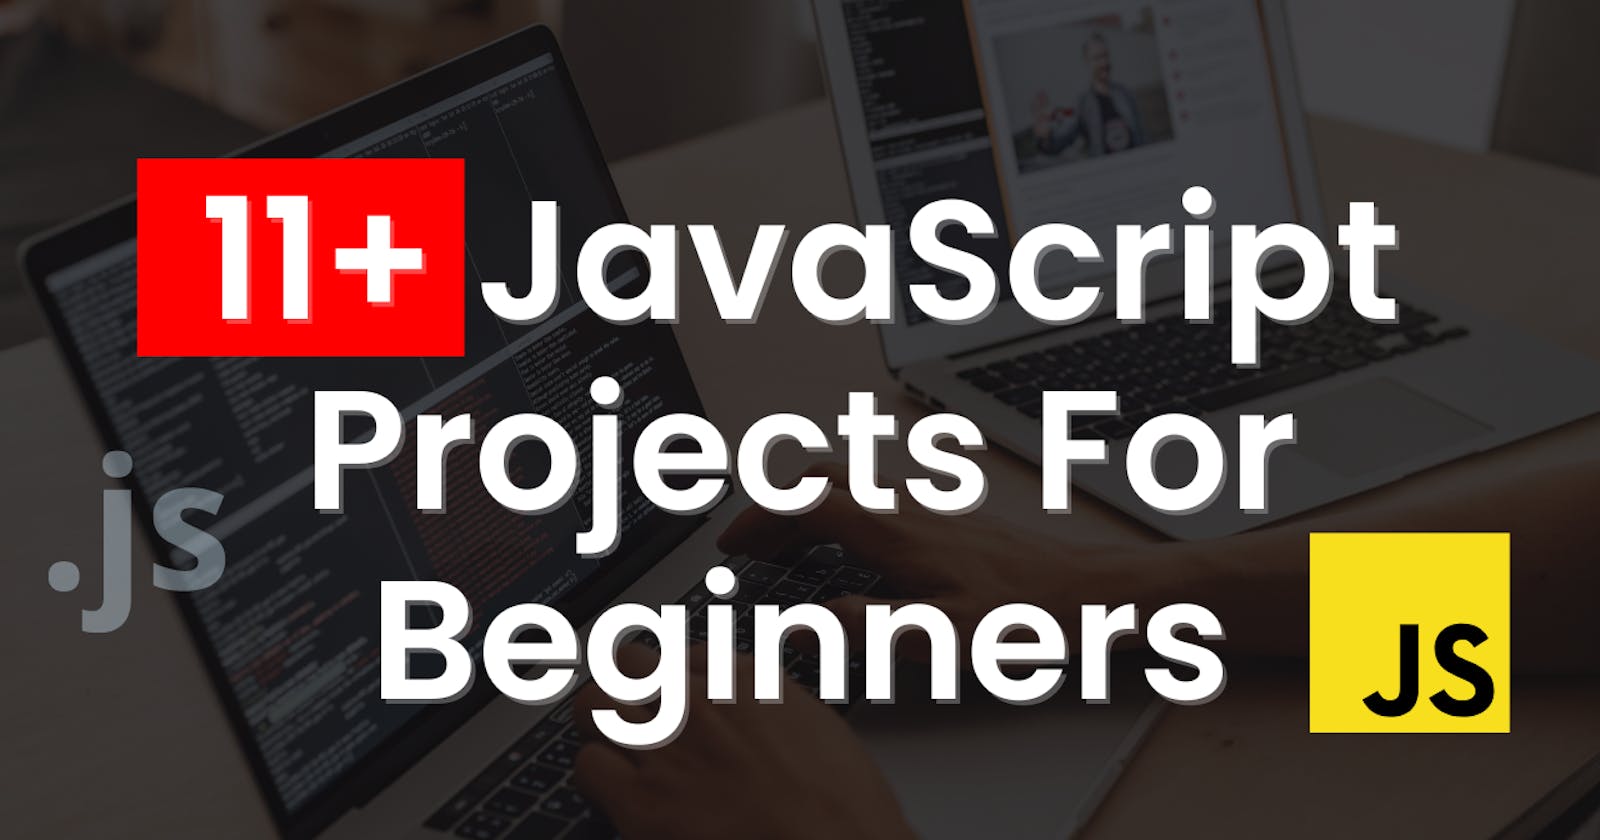 11+ JavaScript Project Ideas For Beginners